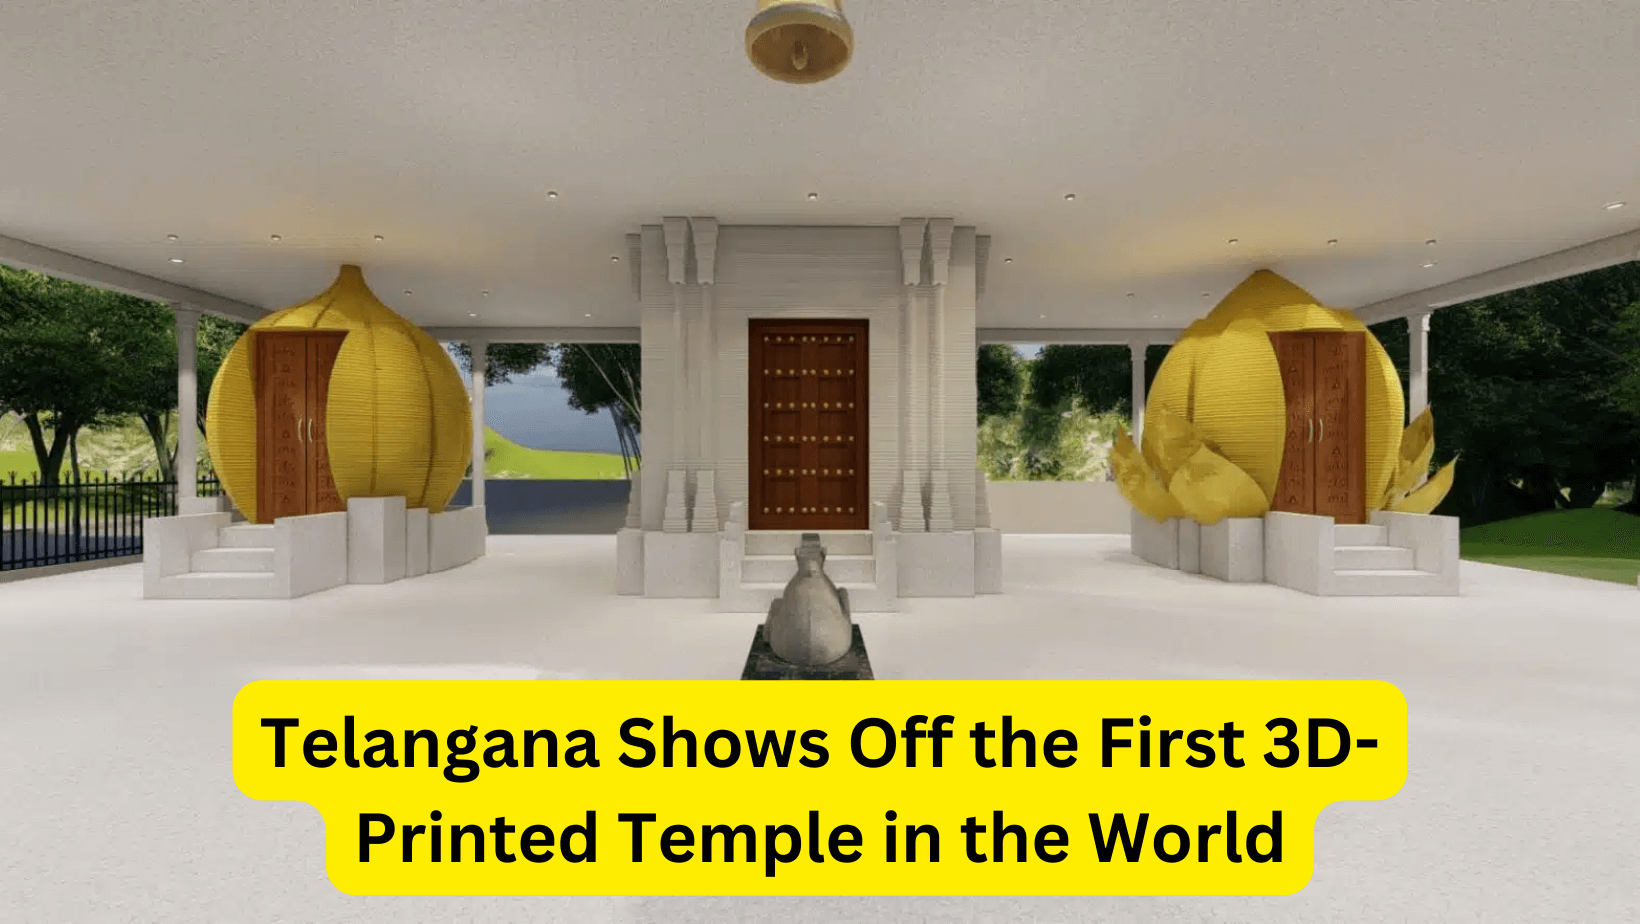 Telangana Shows Off the First 3D-Printed Temple in the World